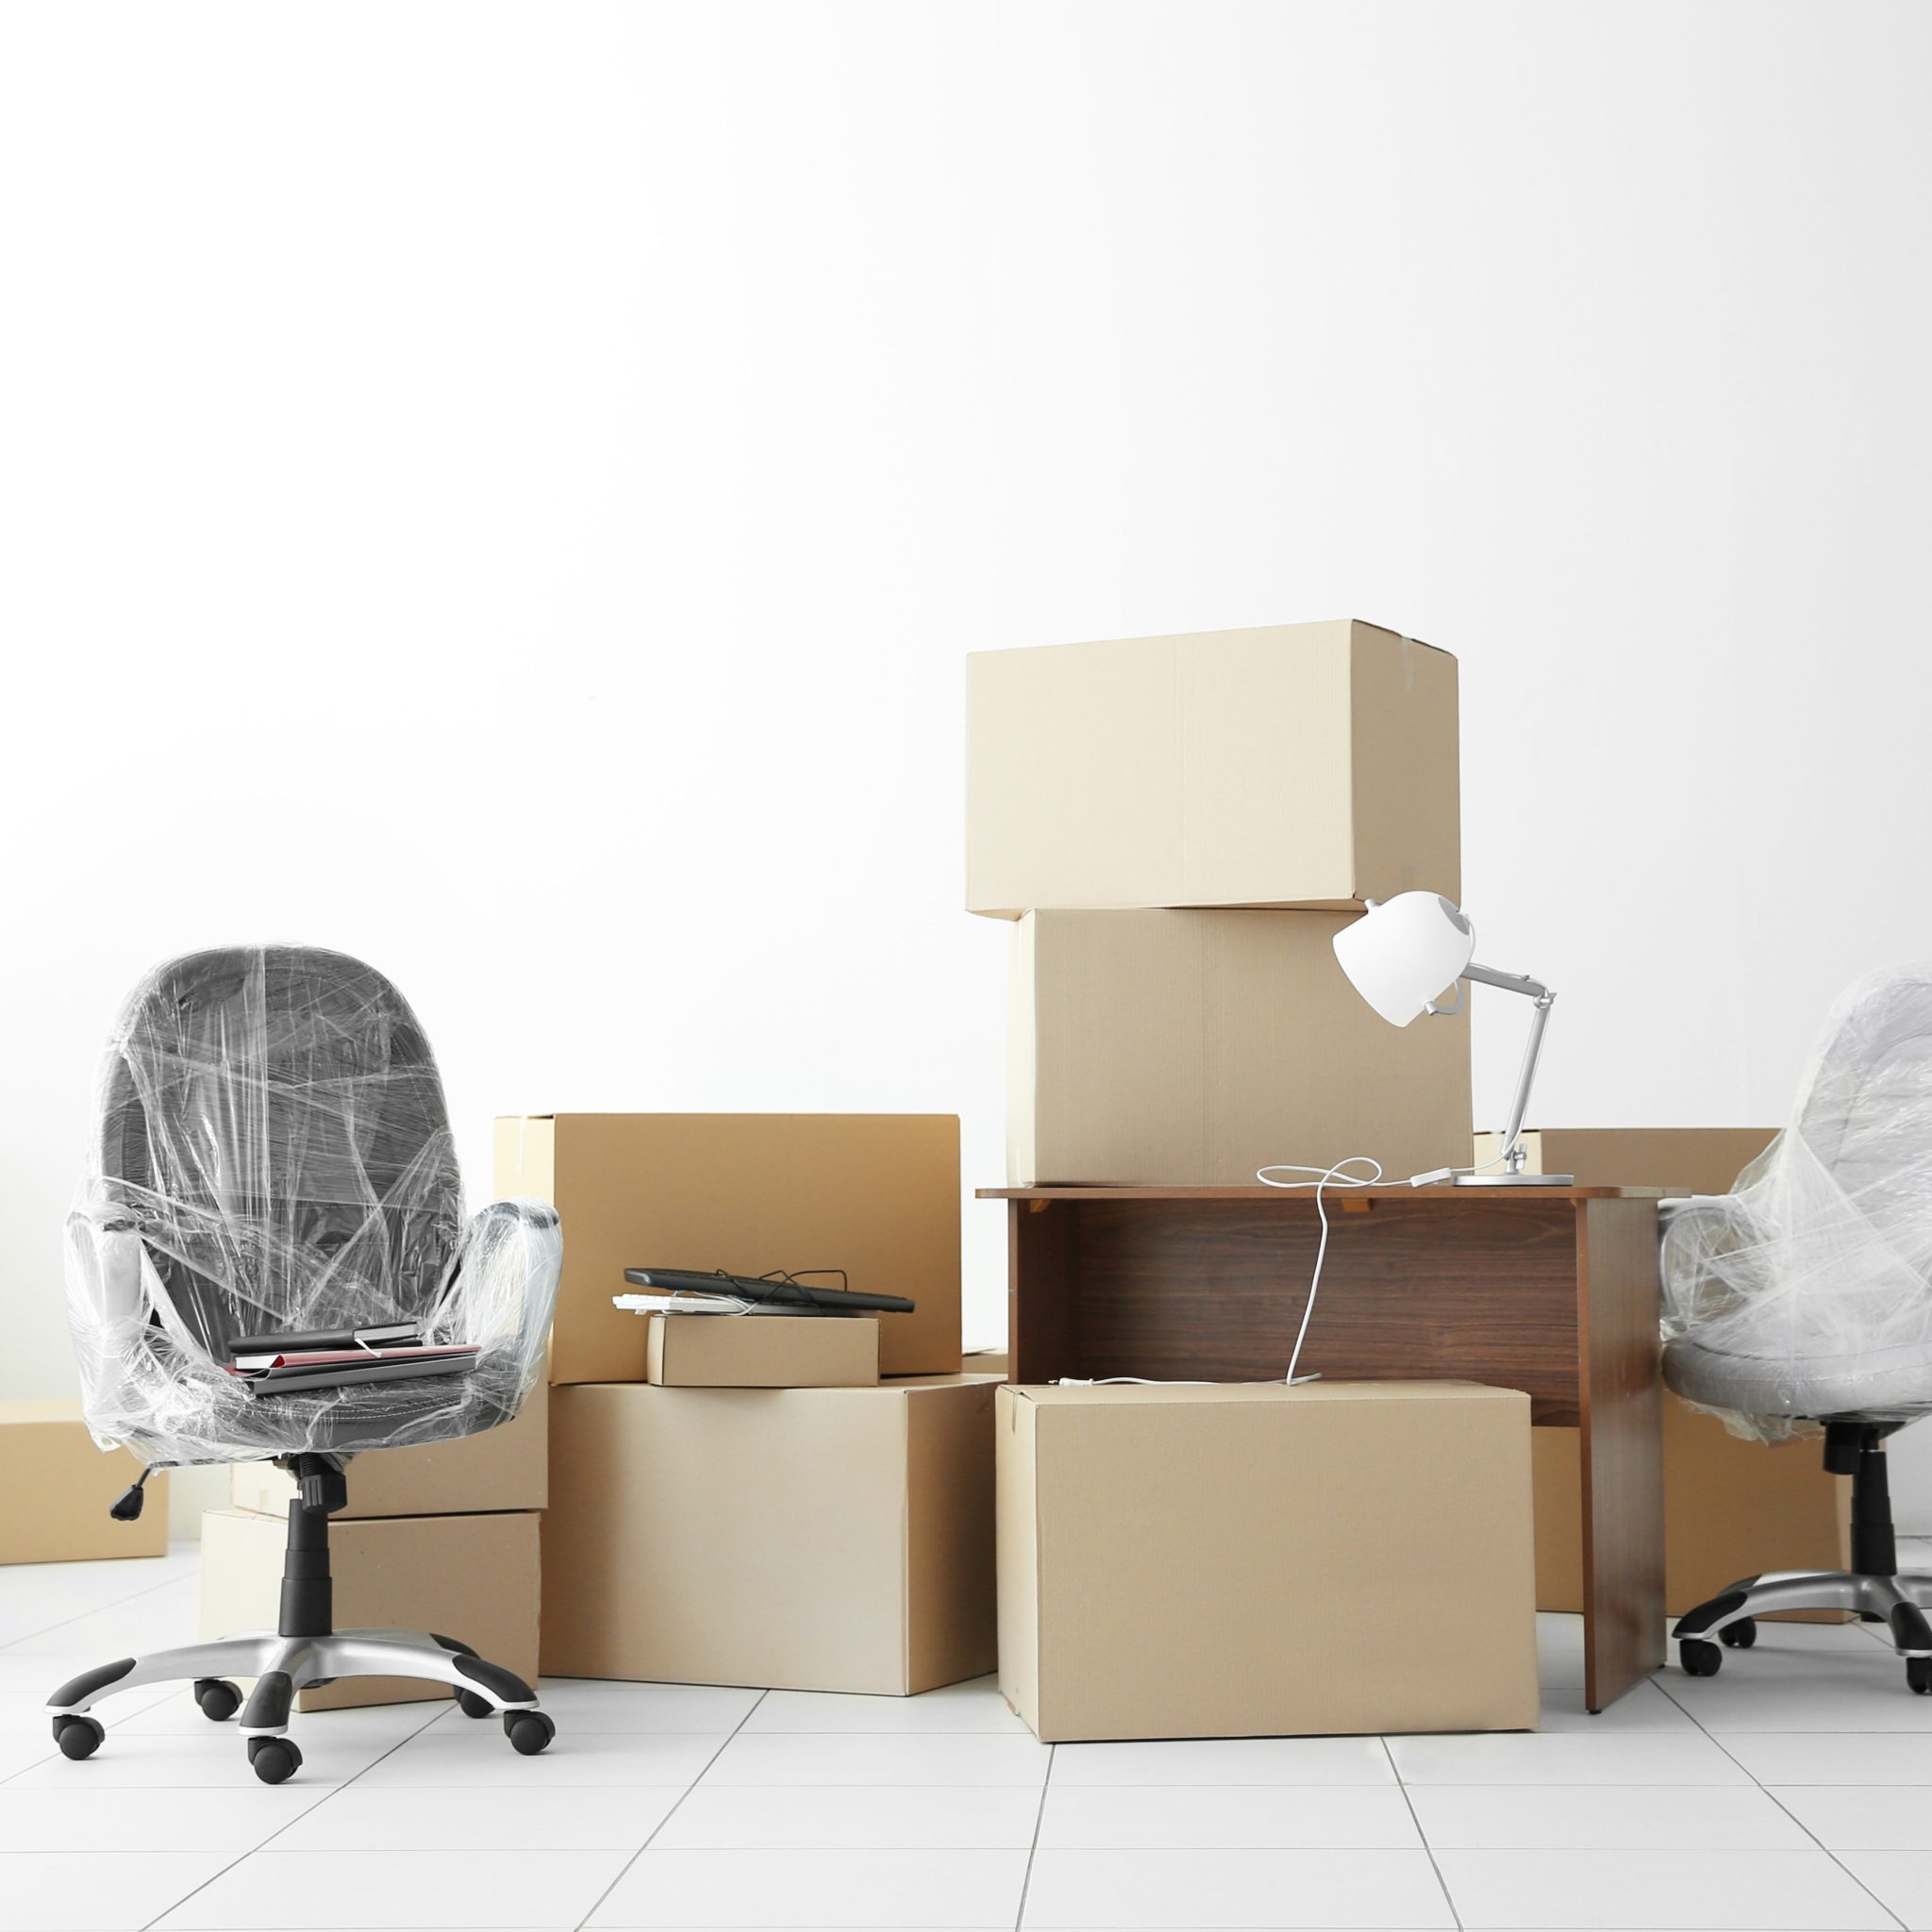 Is it Time for Your Business to Relocate